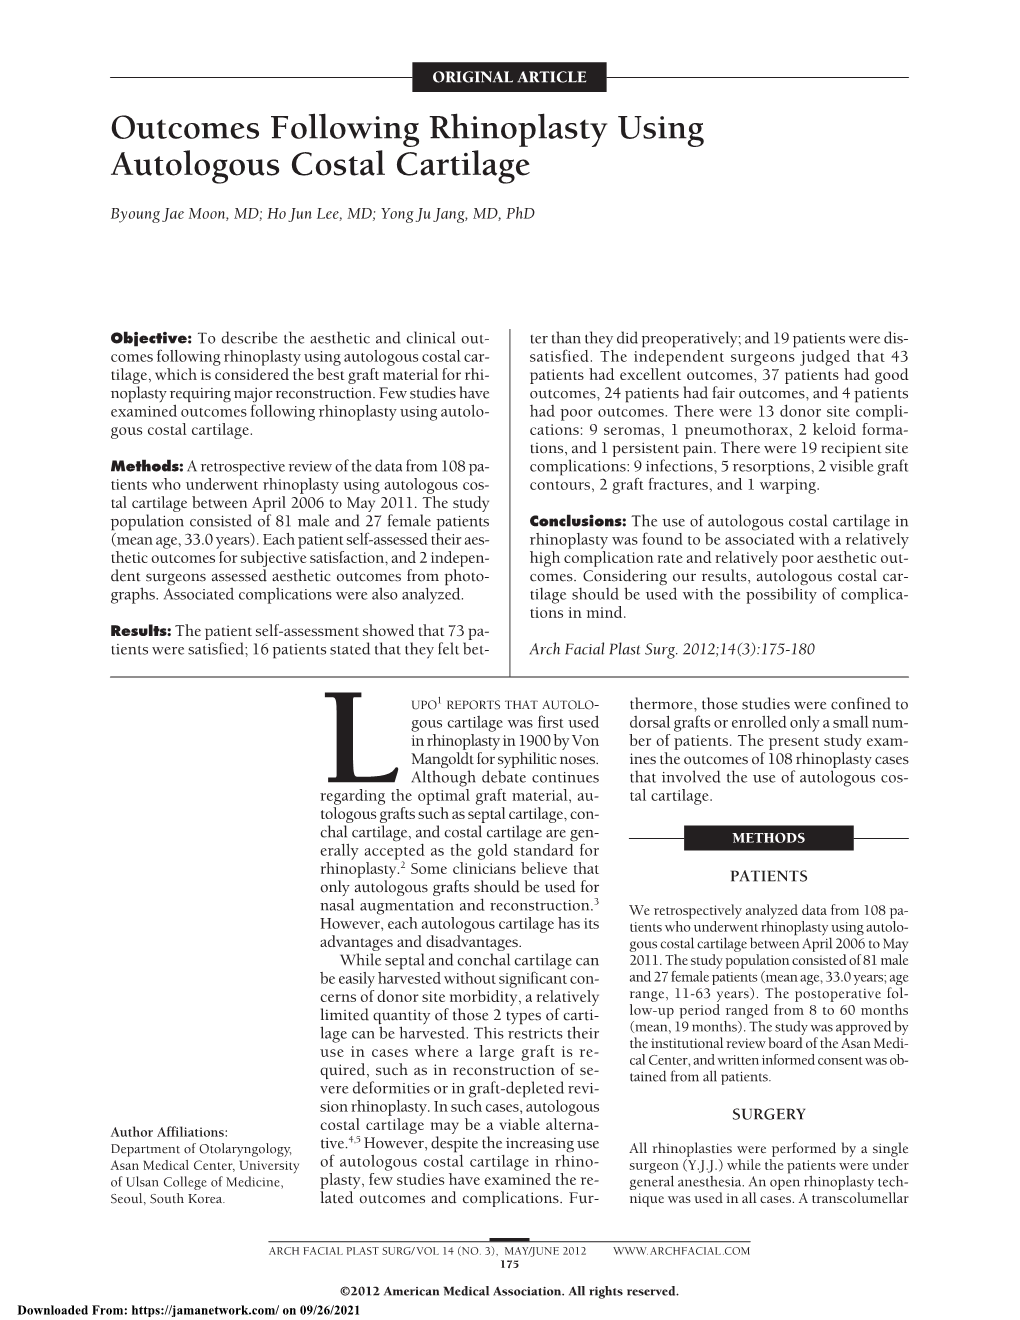 Outcomes Following Rhinoplasty Using Autologous Costal Cartilage